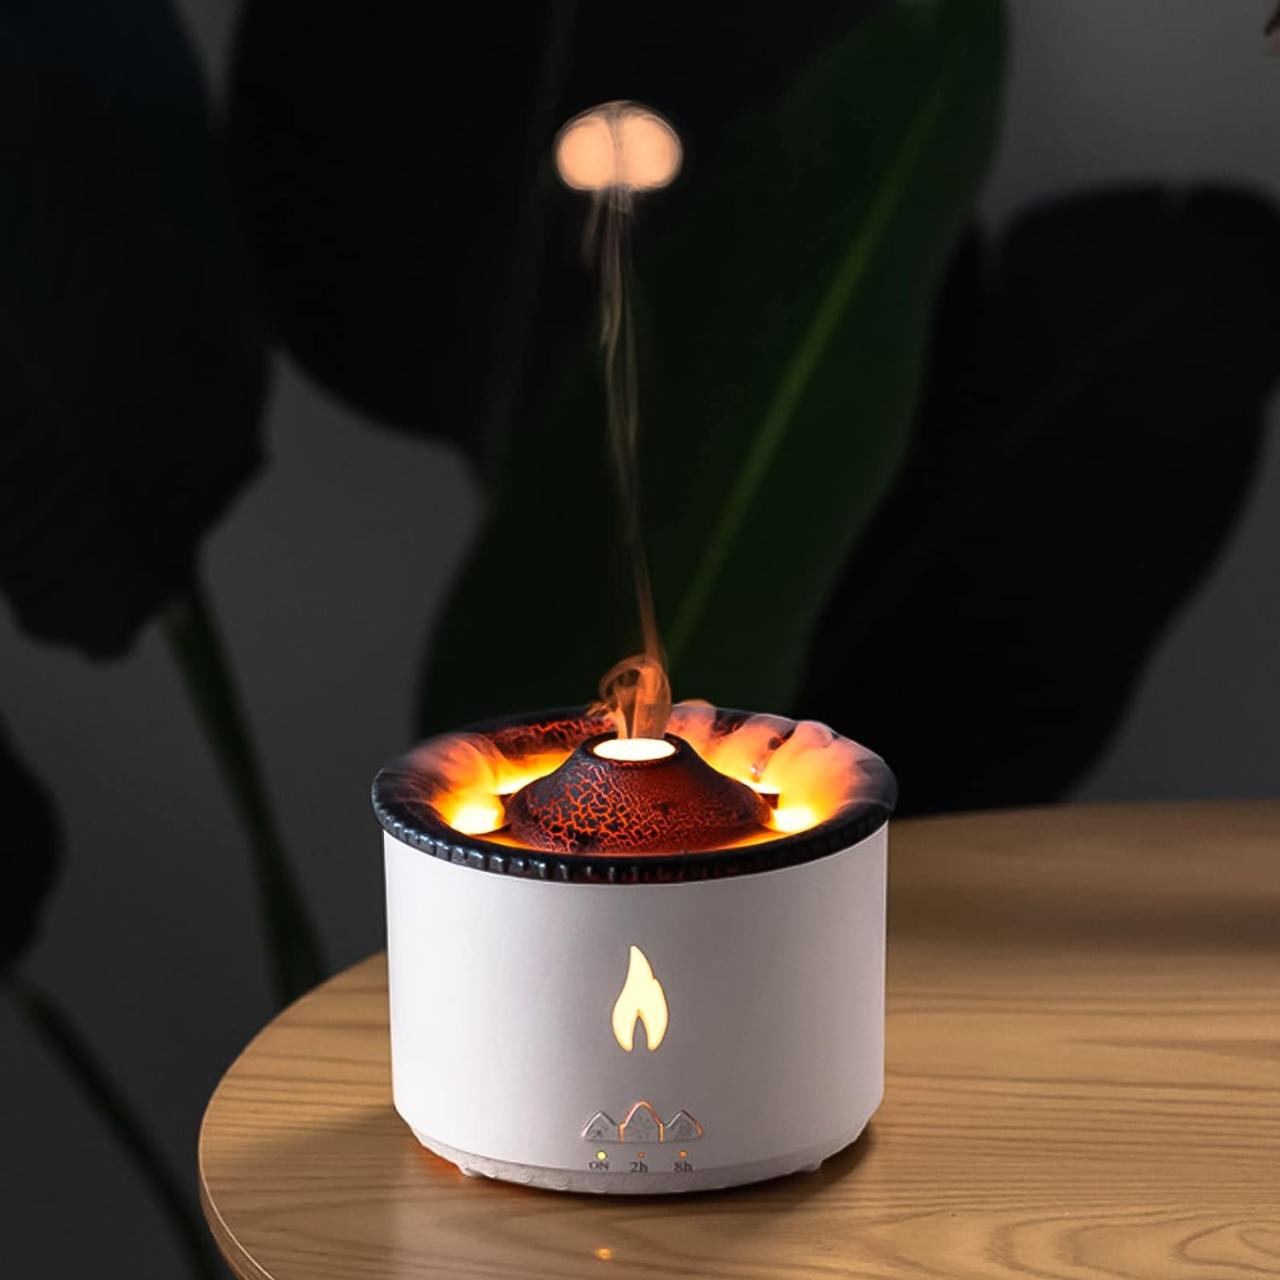 Humidifier aromatherapy diffuser